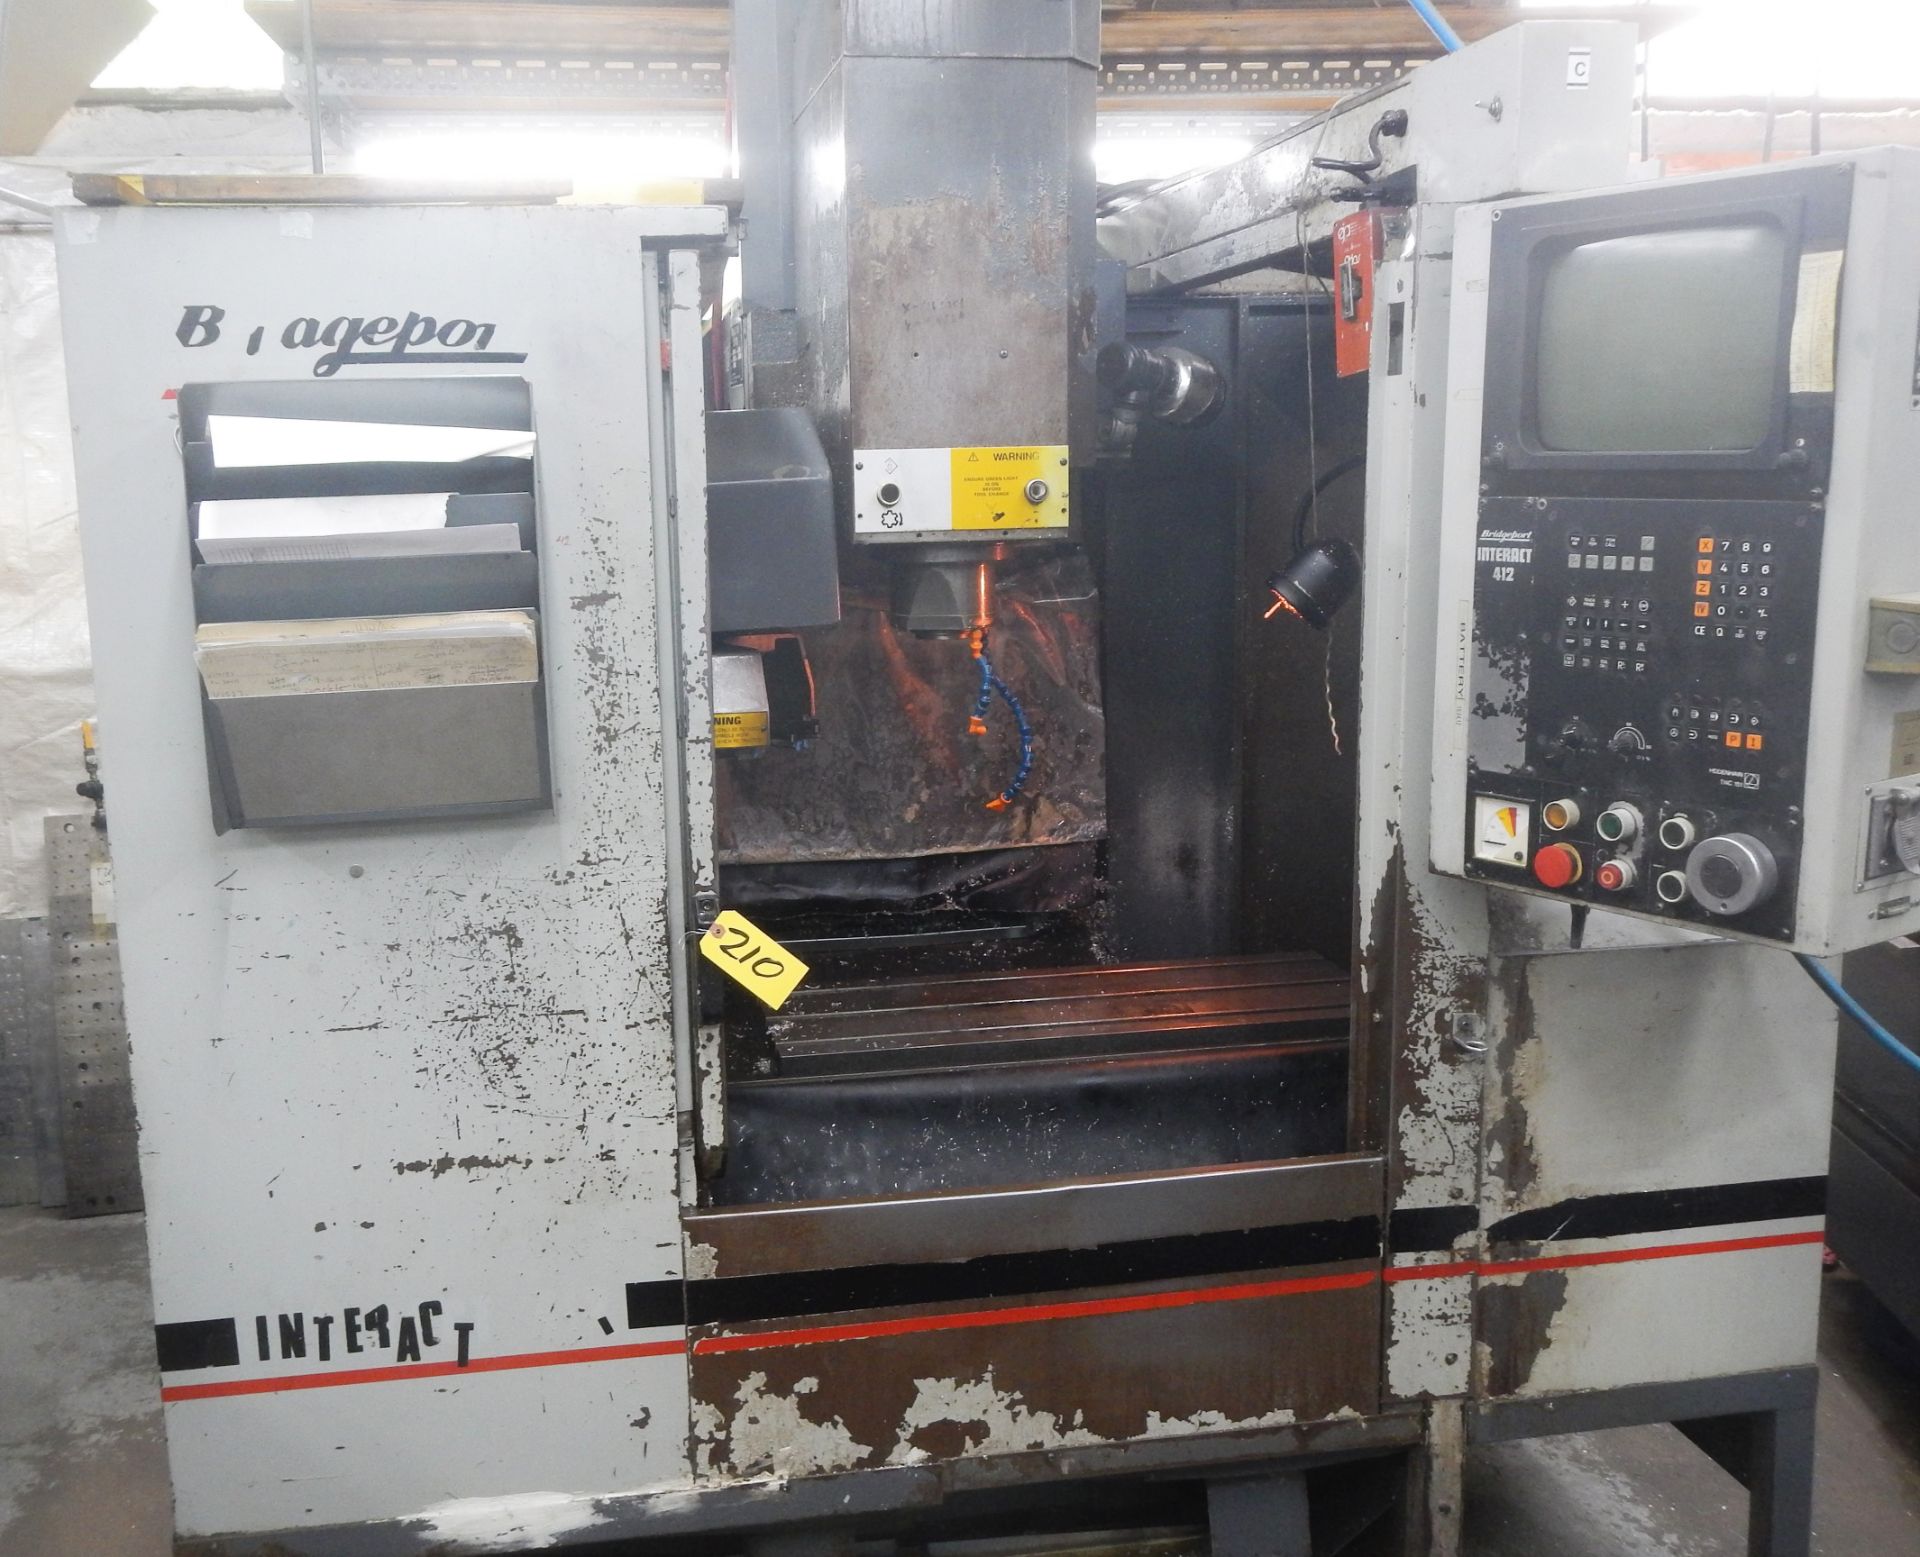 BRIDGEPORT MDL. INT-412V INTERACT CNC VERTICAL MACHINING CENTER, WITH BT-40 TAPER SPINDLE, - Image 2 of 5